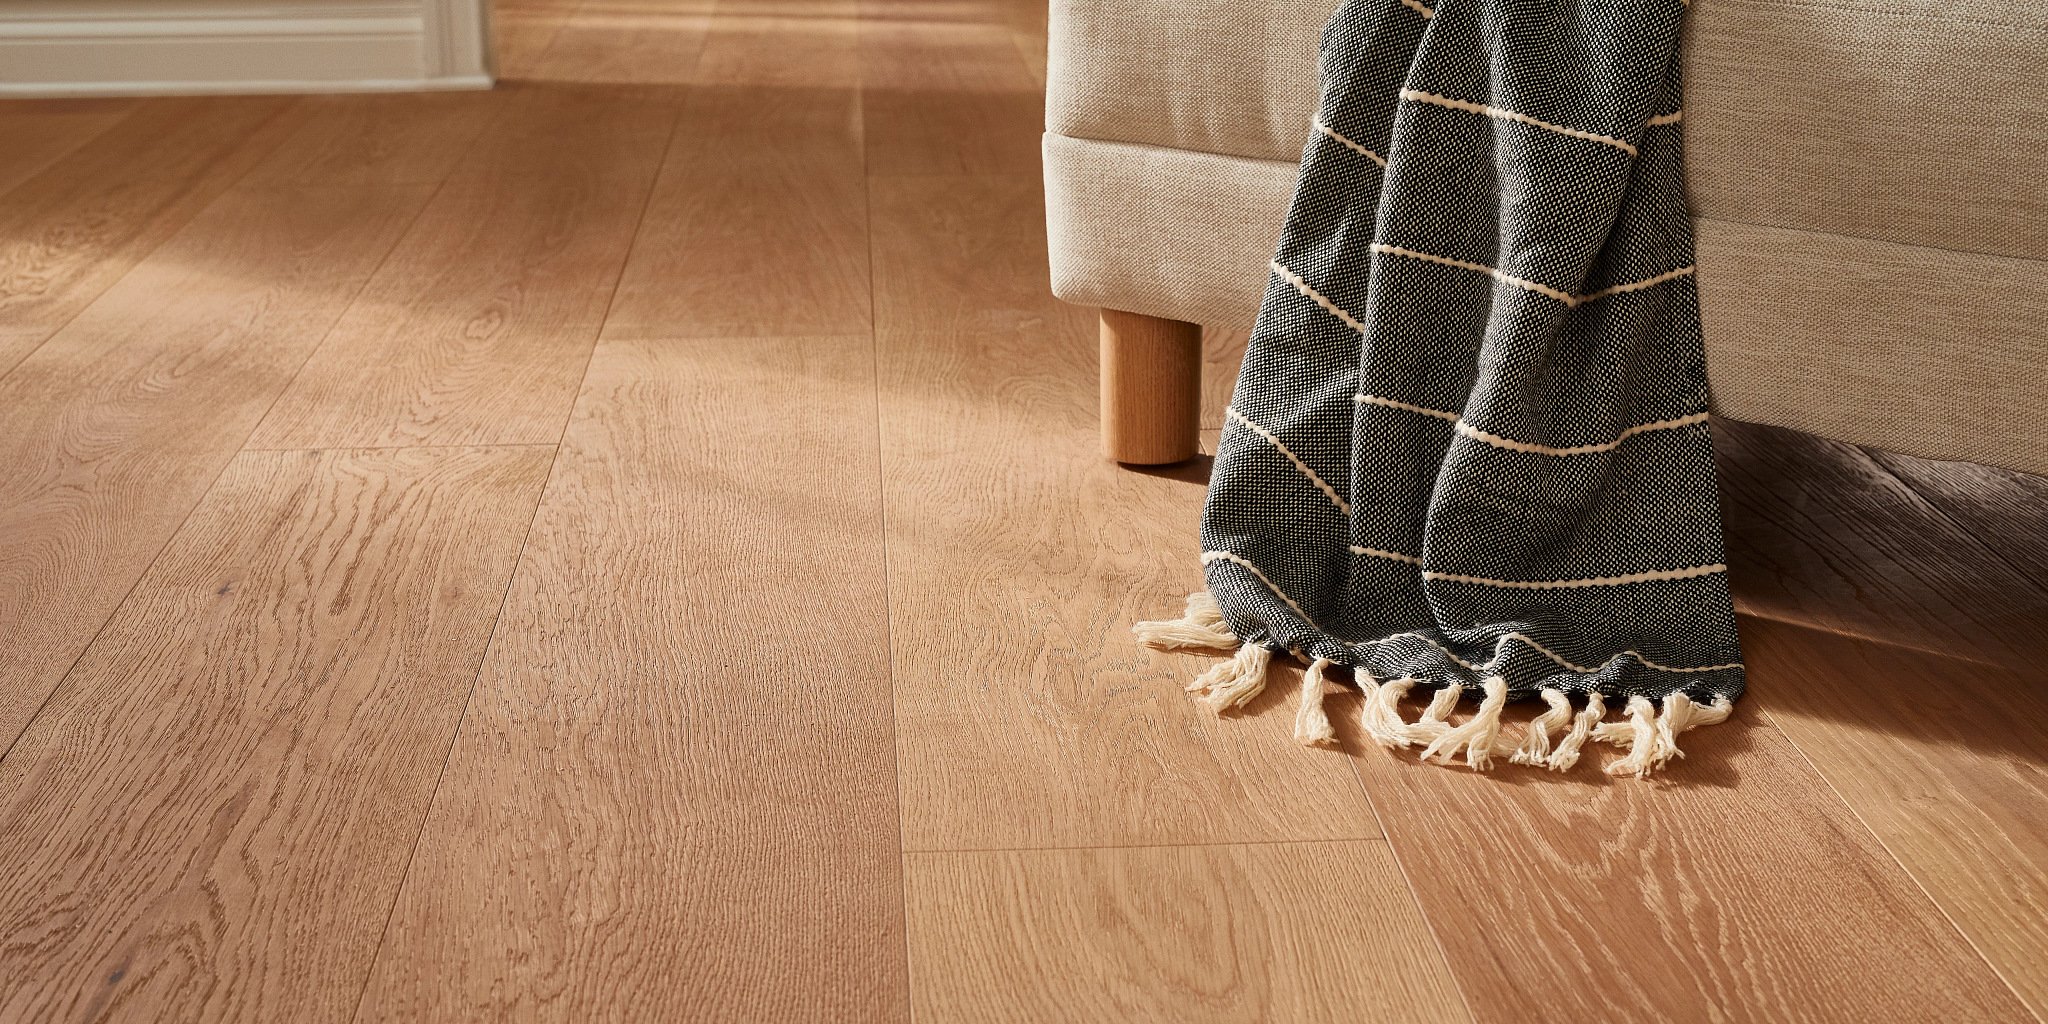 Advice to extend the life of hardwood flooring.